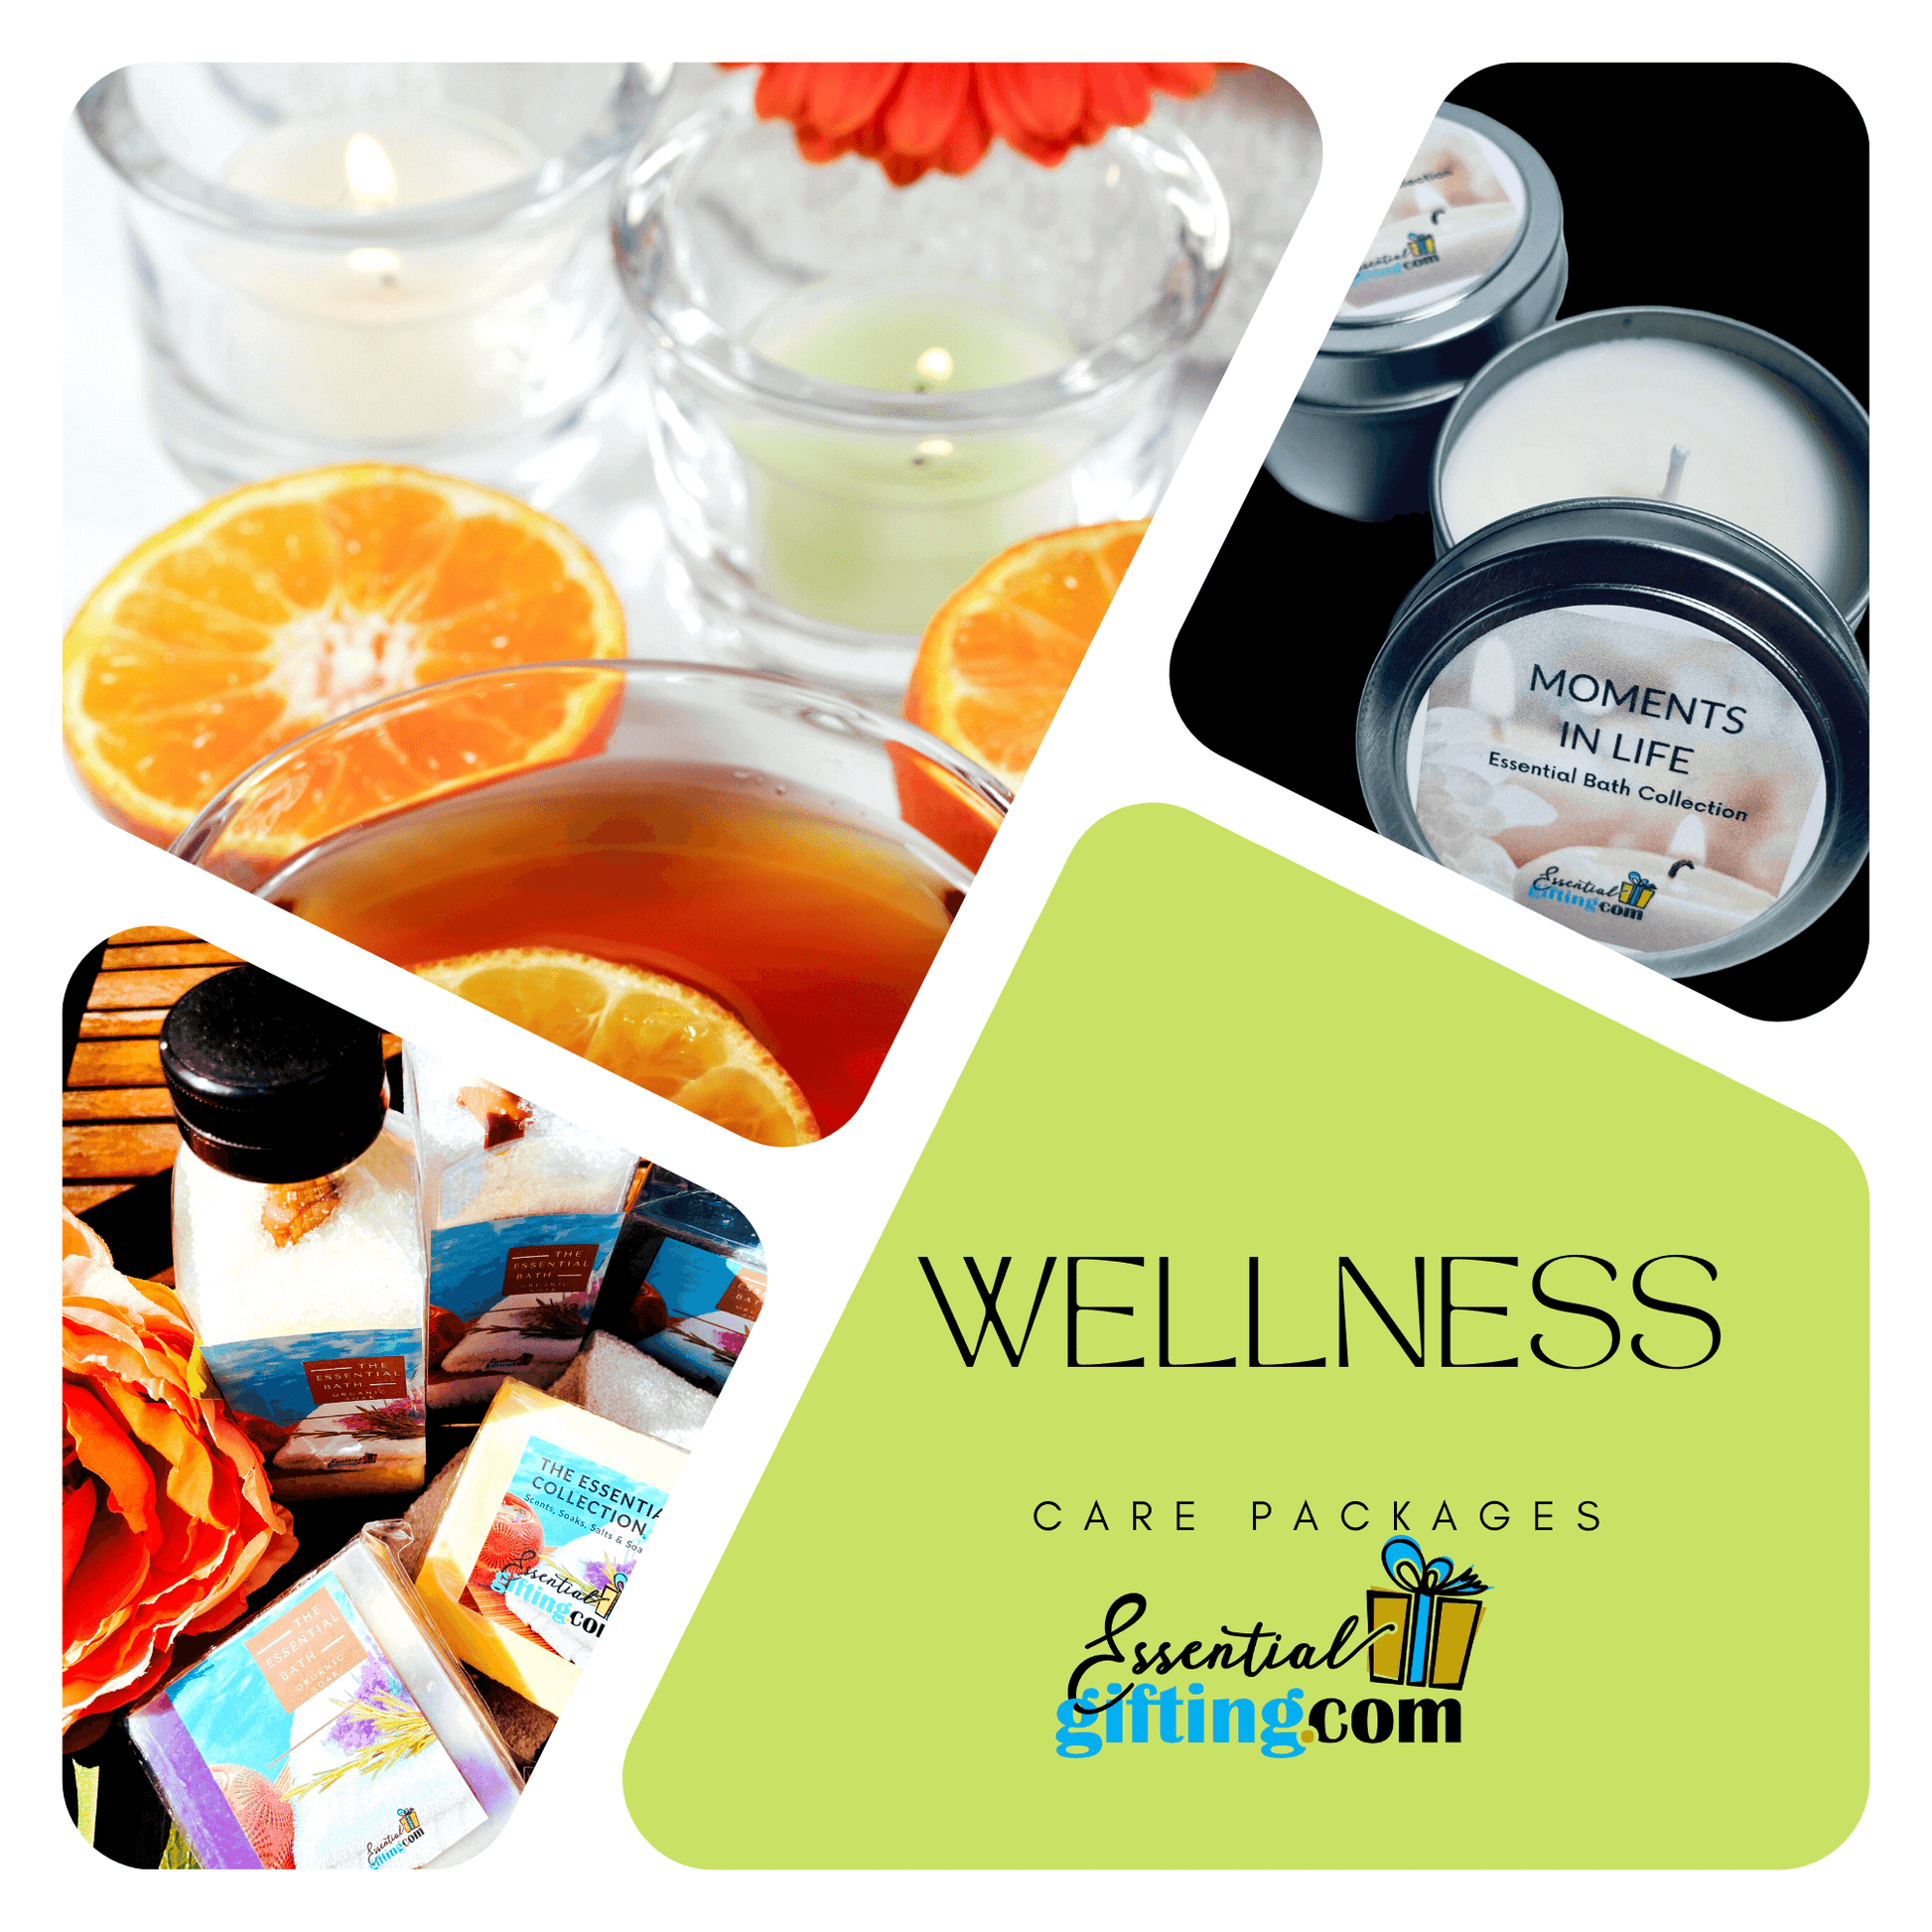 Personalized wellness care package with self-care products, fresh citrus, and relaxing accessories.